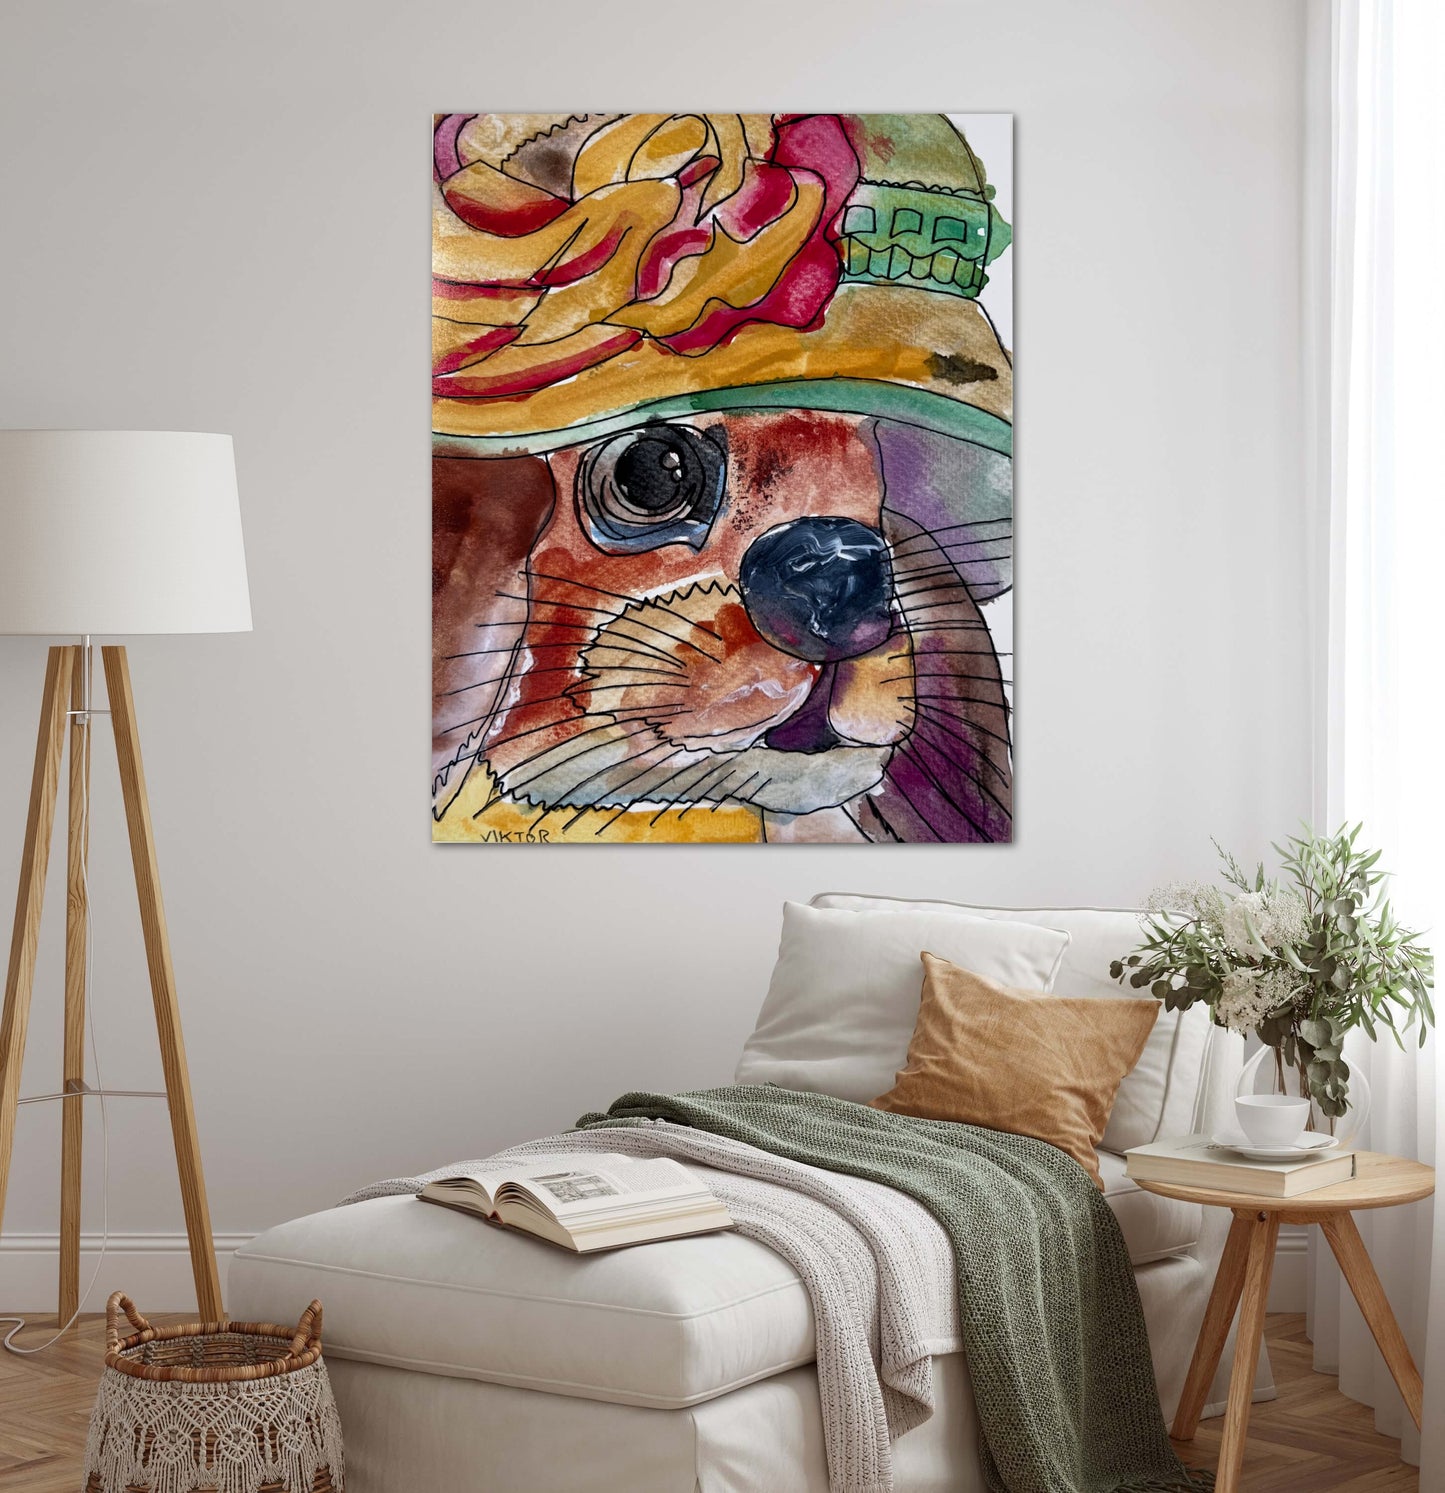 Rabbit Collection 6 (with a hat) - Print, Poster and Stretched Canvas Print